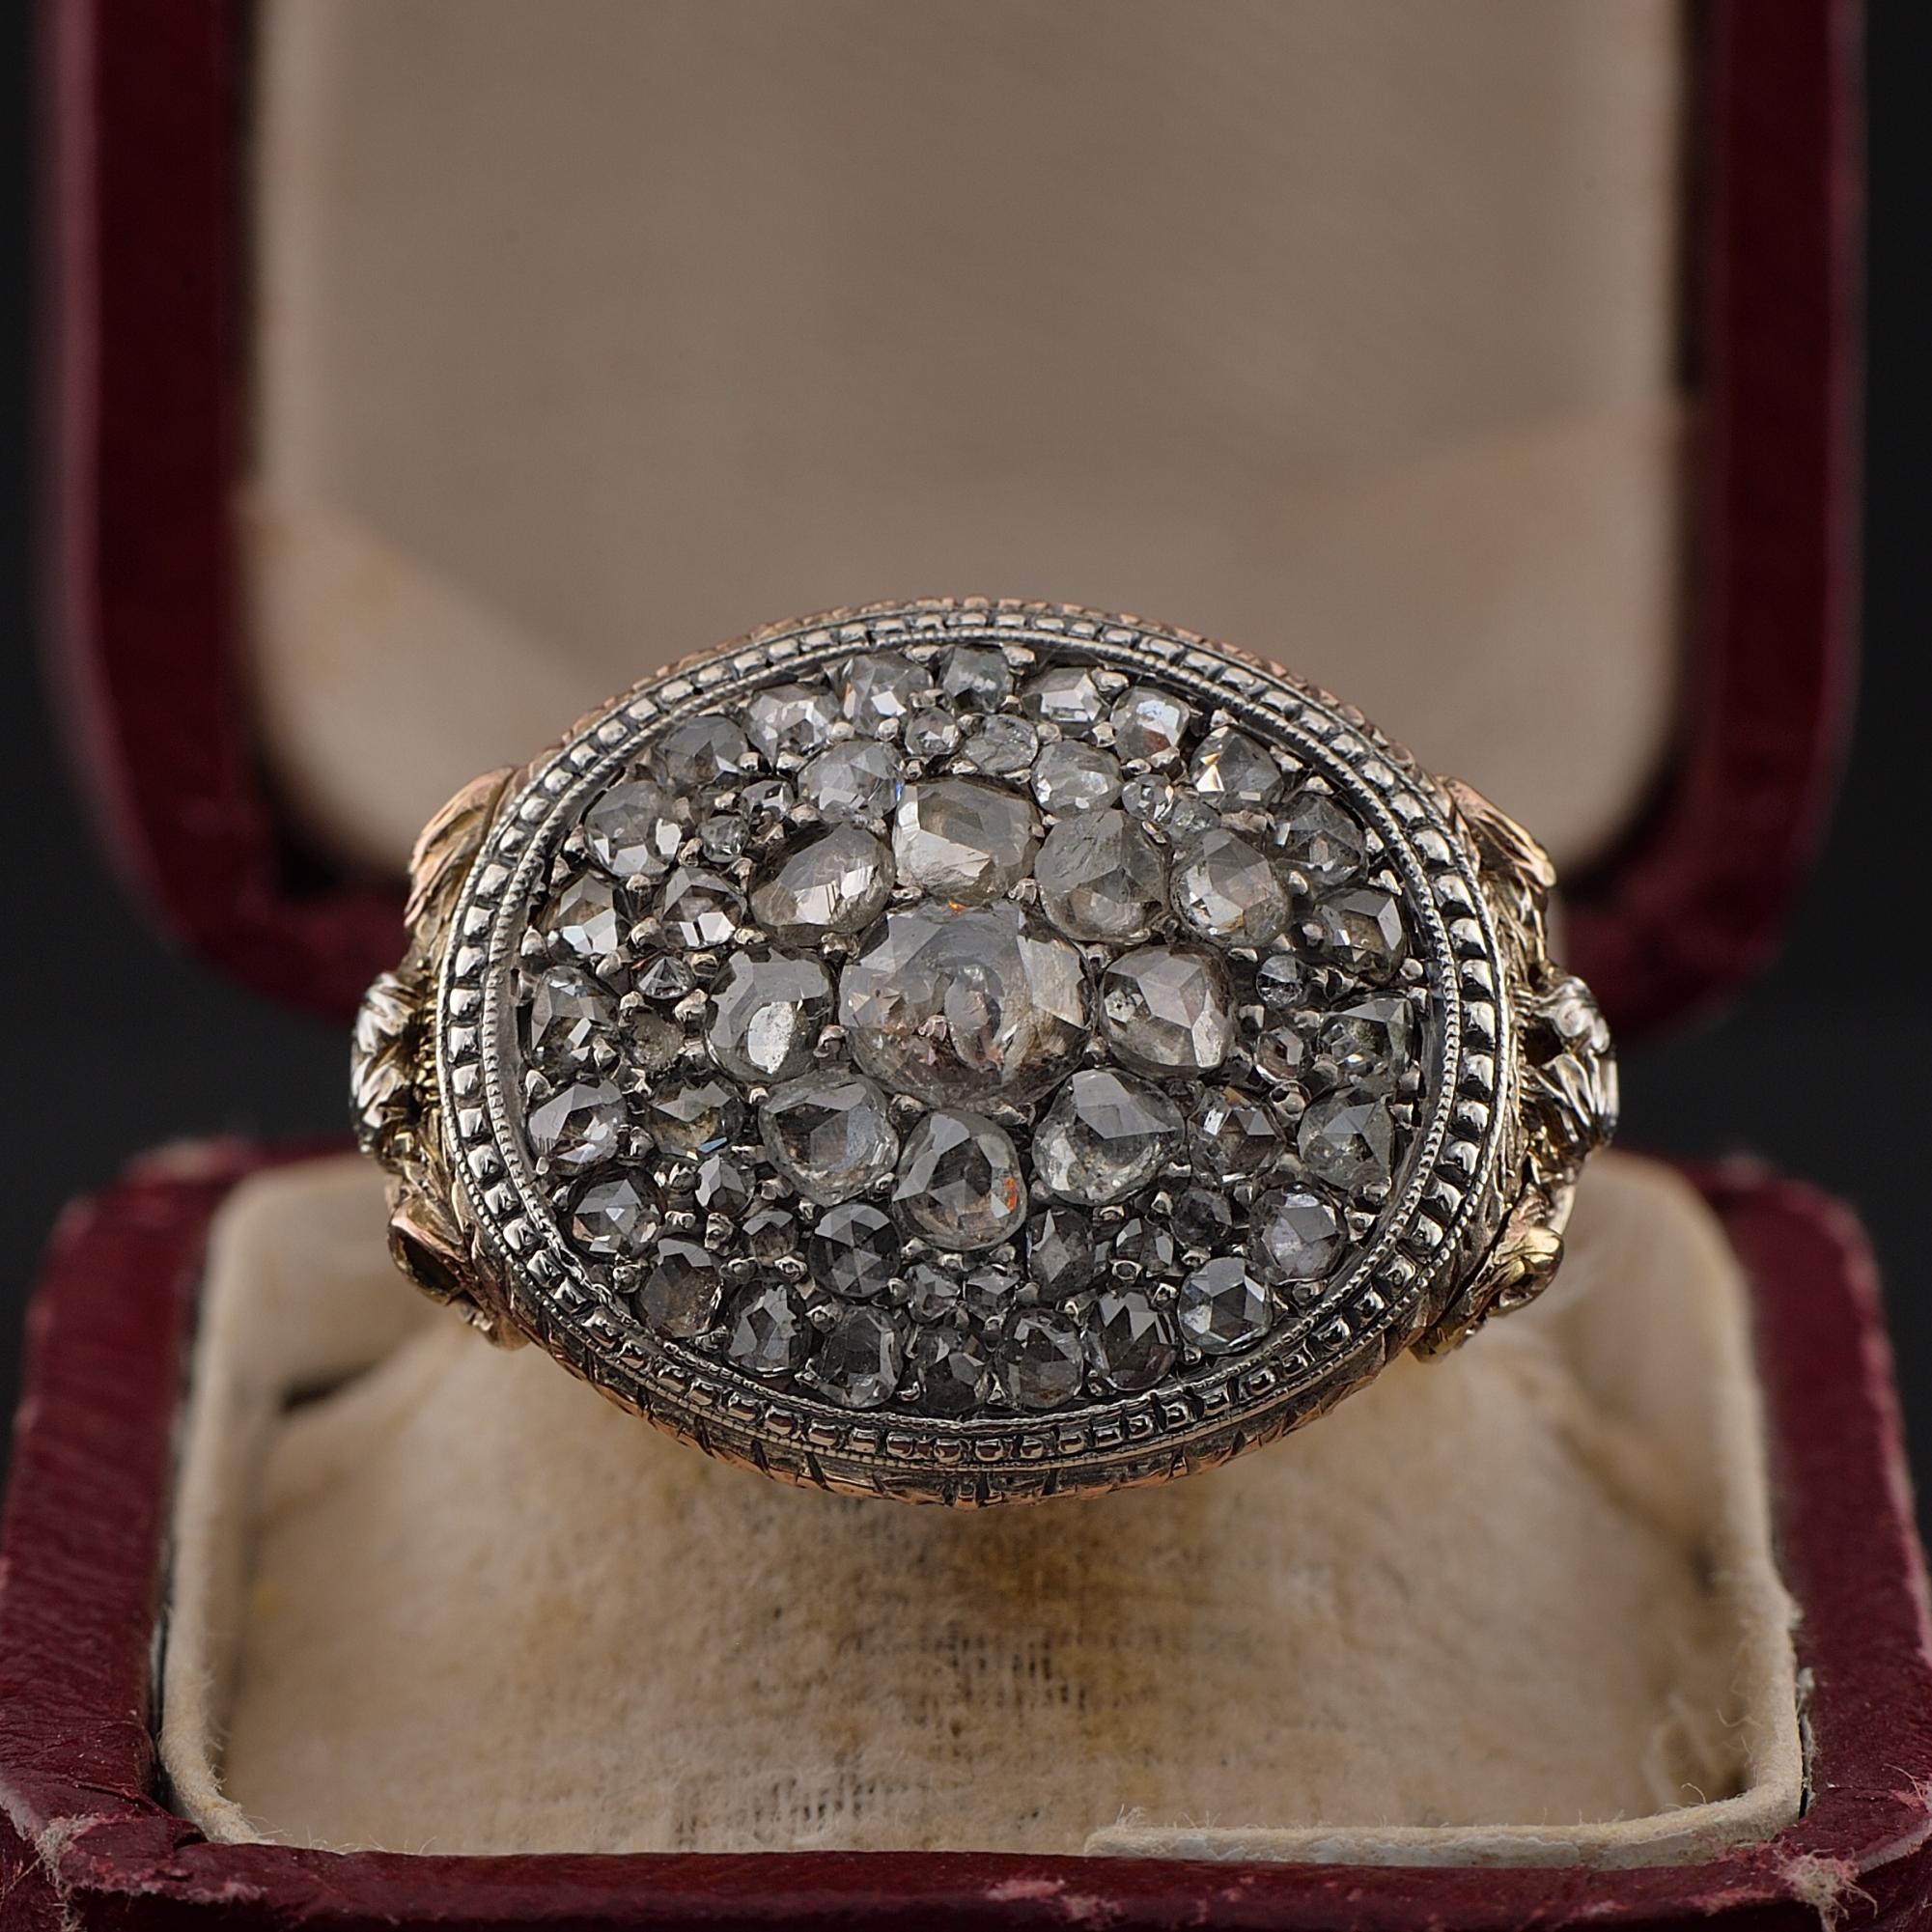 Antique 19th century ring that leaves speechless for the amazing crafting, 1850 ca,
Skilful workmanship of the era, richly detailed at every side, hidden sides are even more intricate and complexly wrought as hardly seen, beautiful carved shoulders